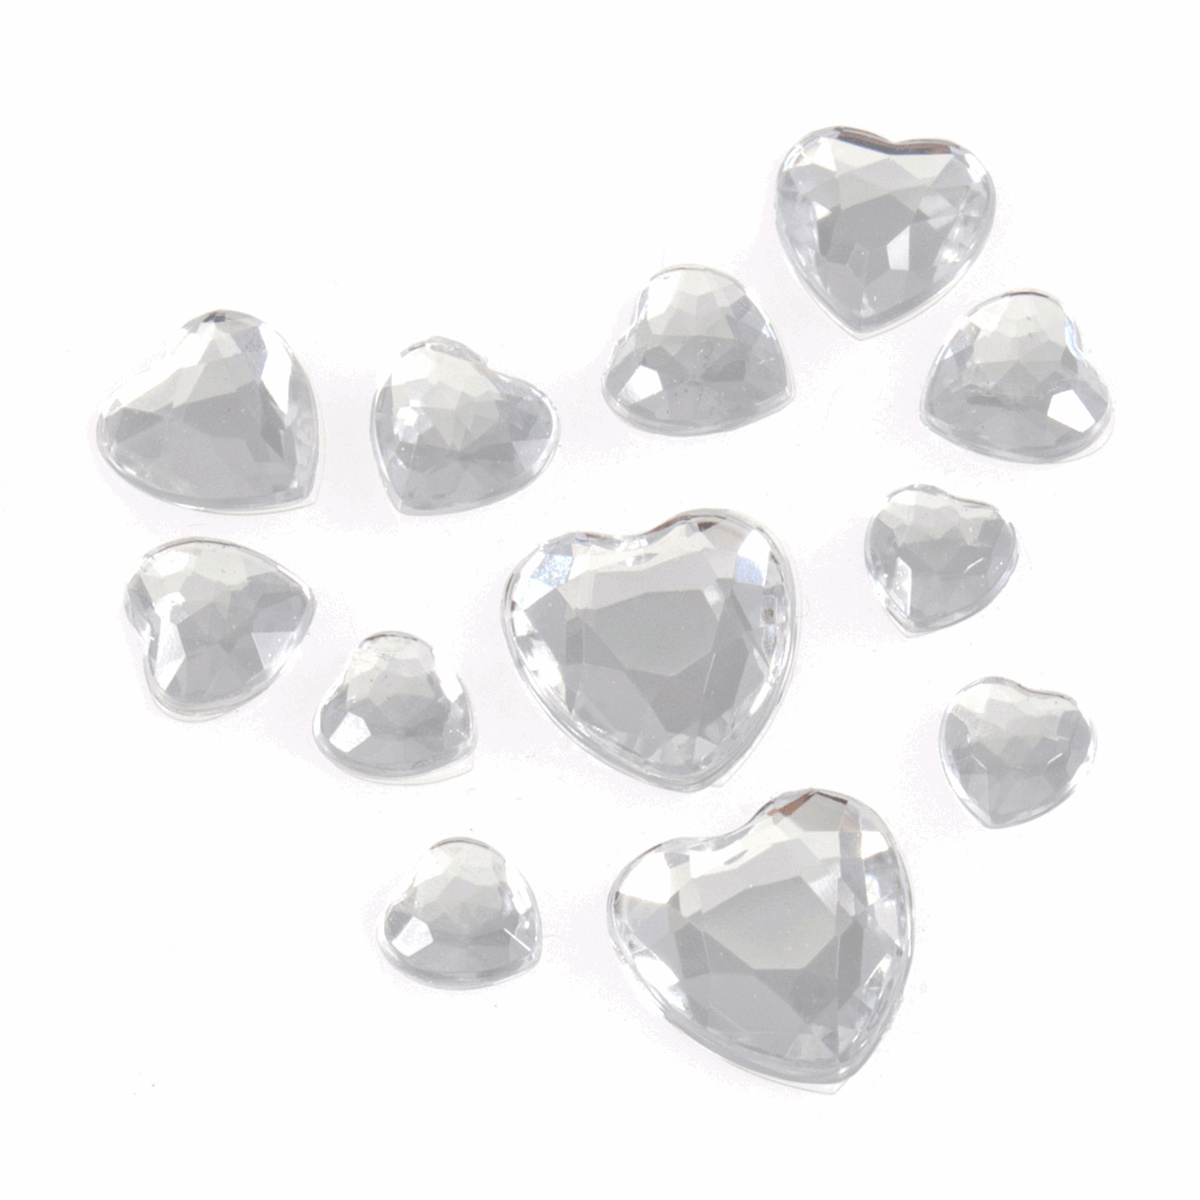 Peel And Stick Bling Bling Gems - Hearts (12 Pcs)